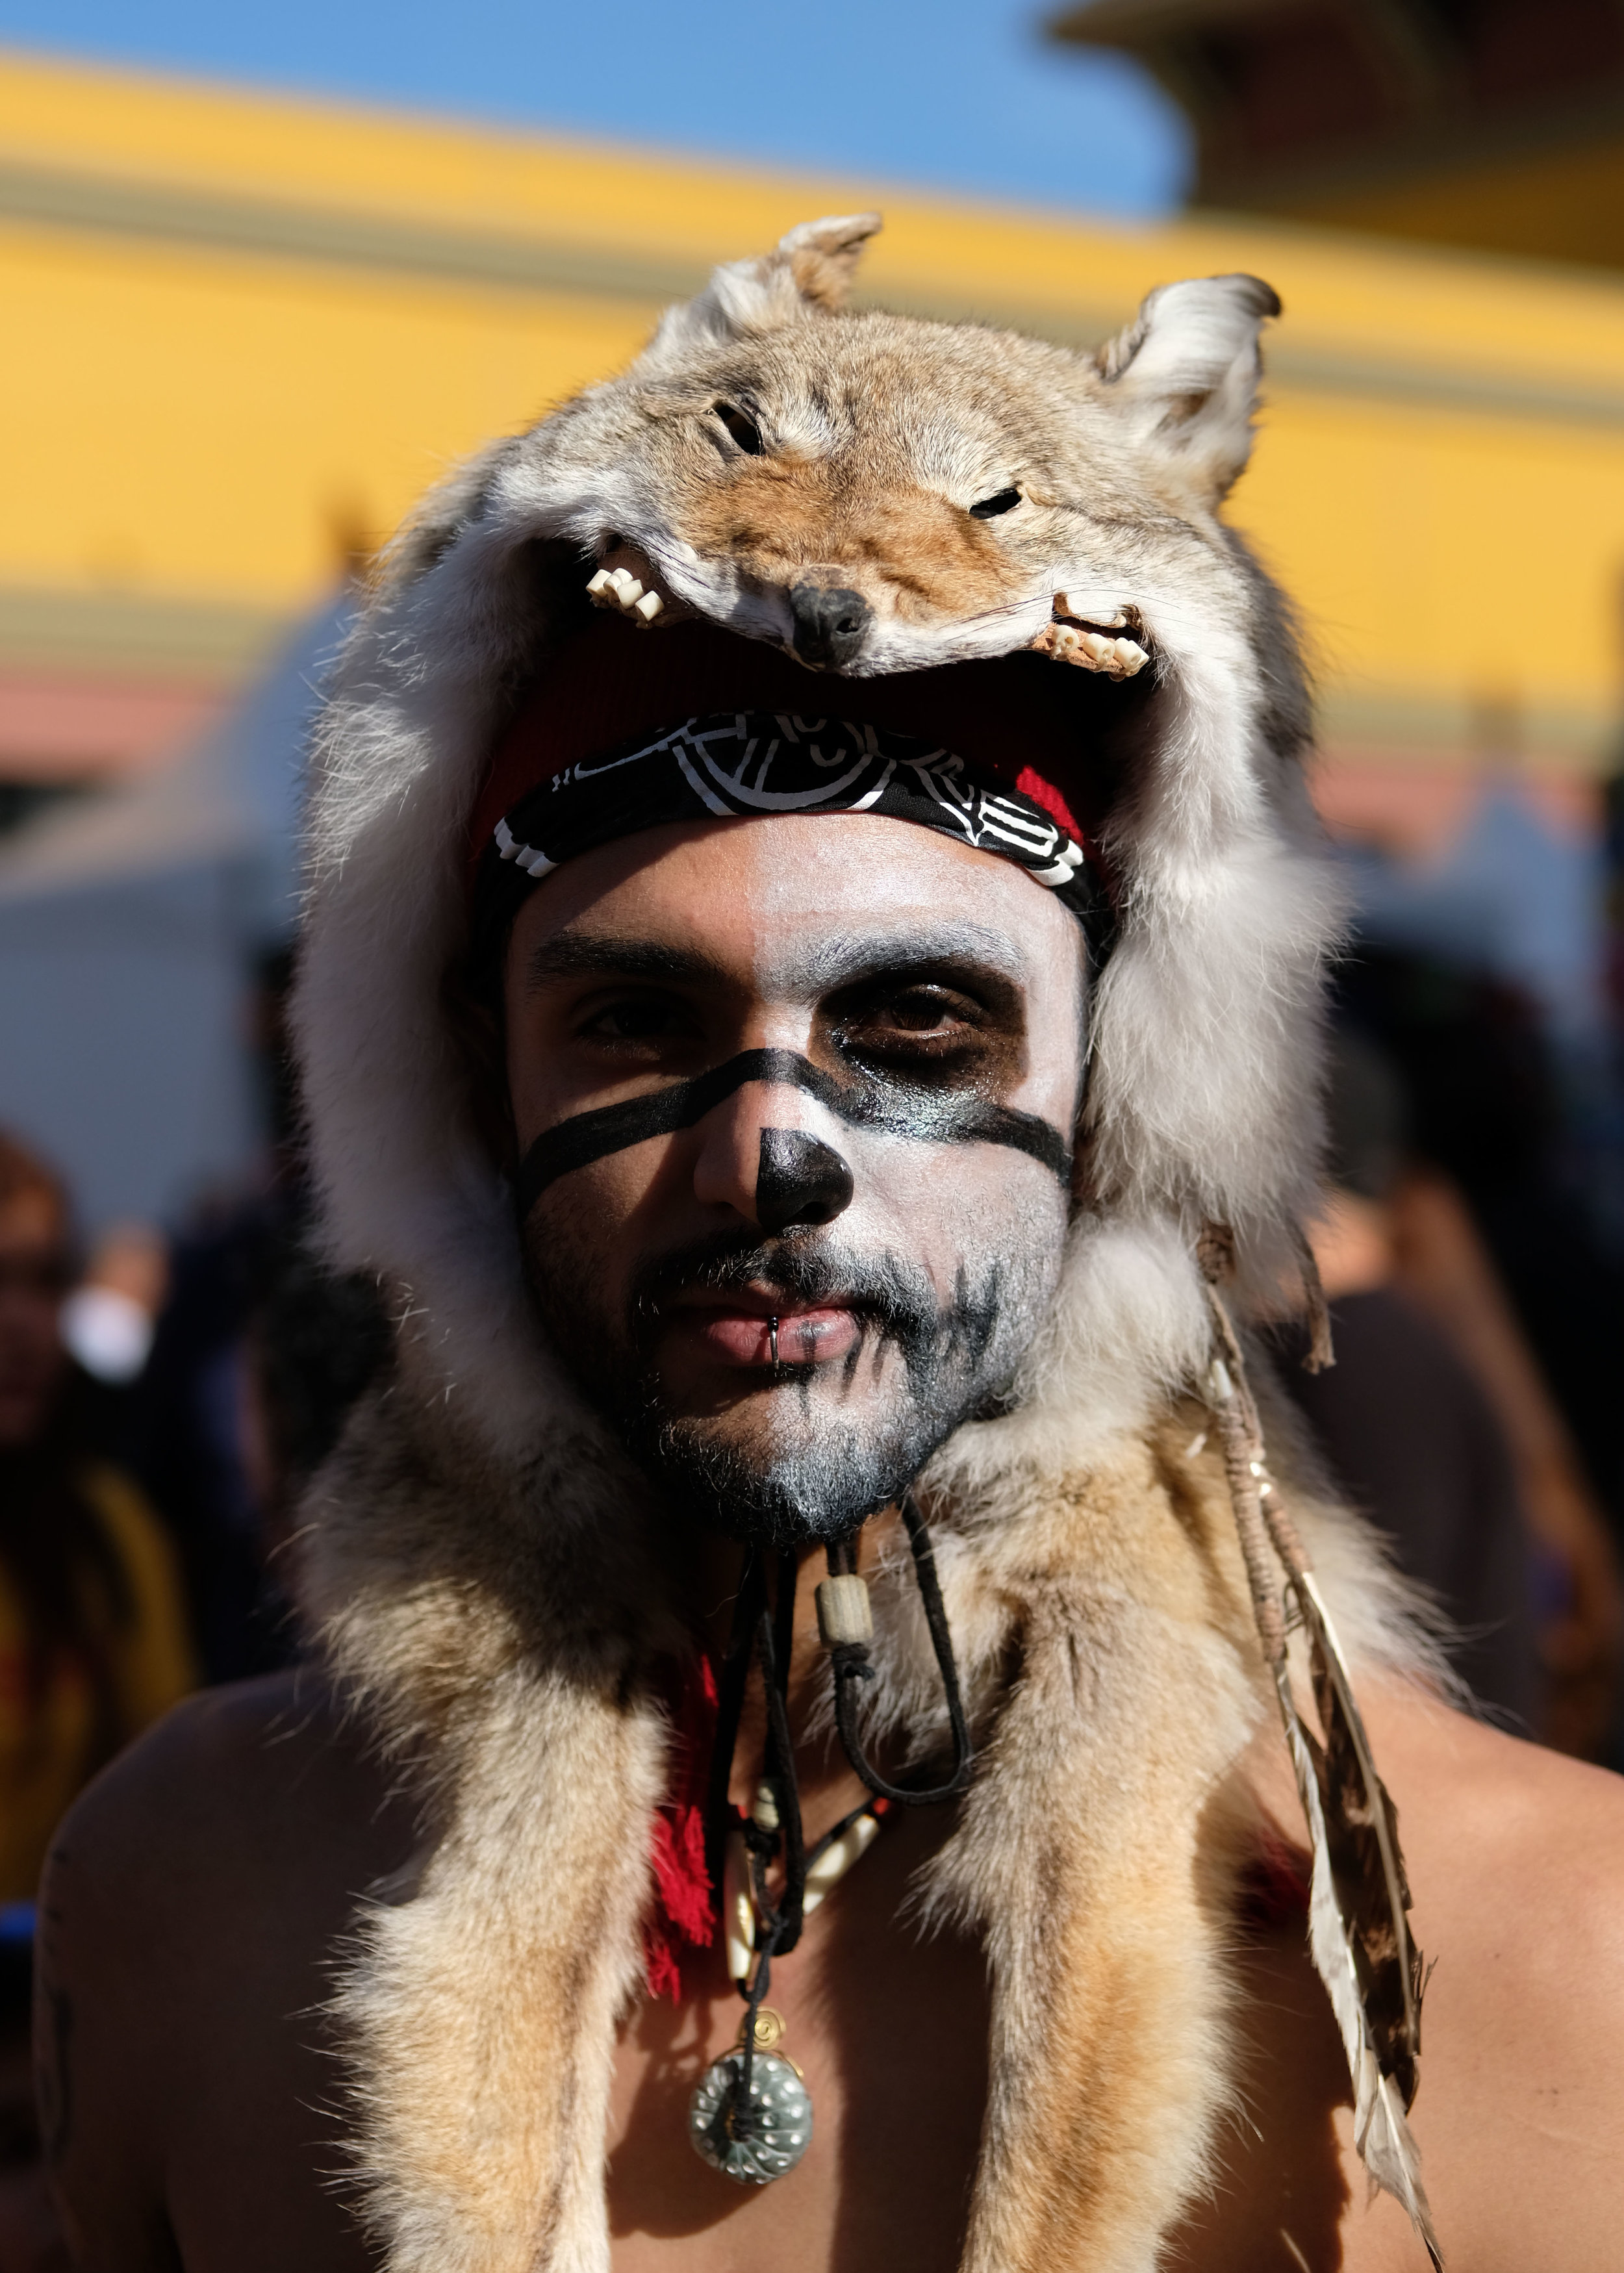  Robert, who has been performing at the festival for the last 2 years, dons a skinned coyote. “The coyote represents the part of me that I can’t control.” 